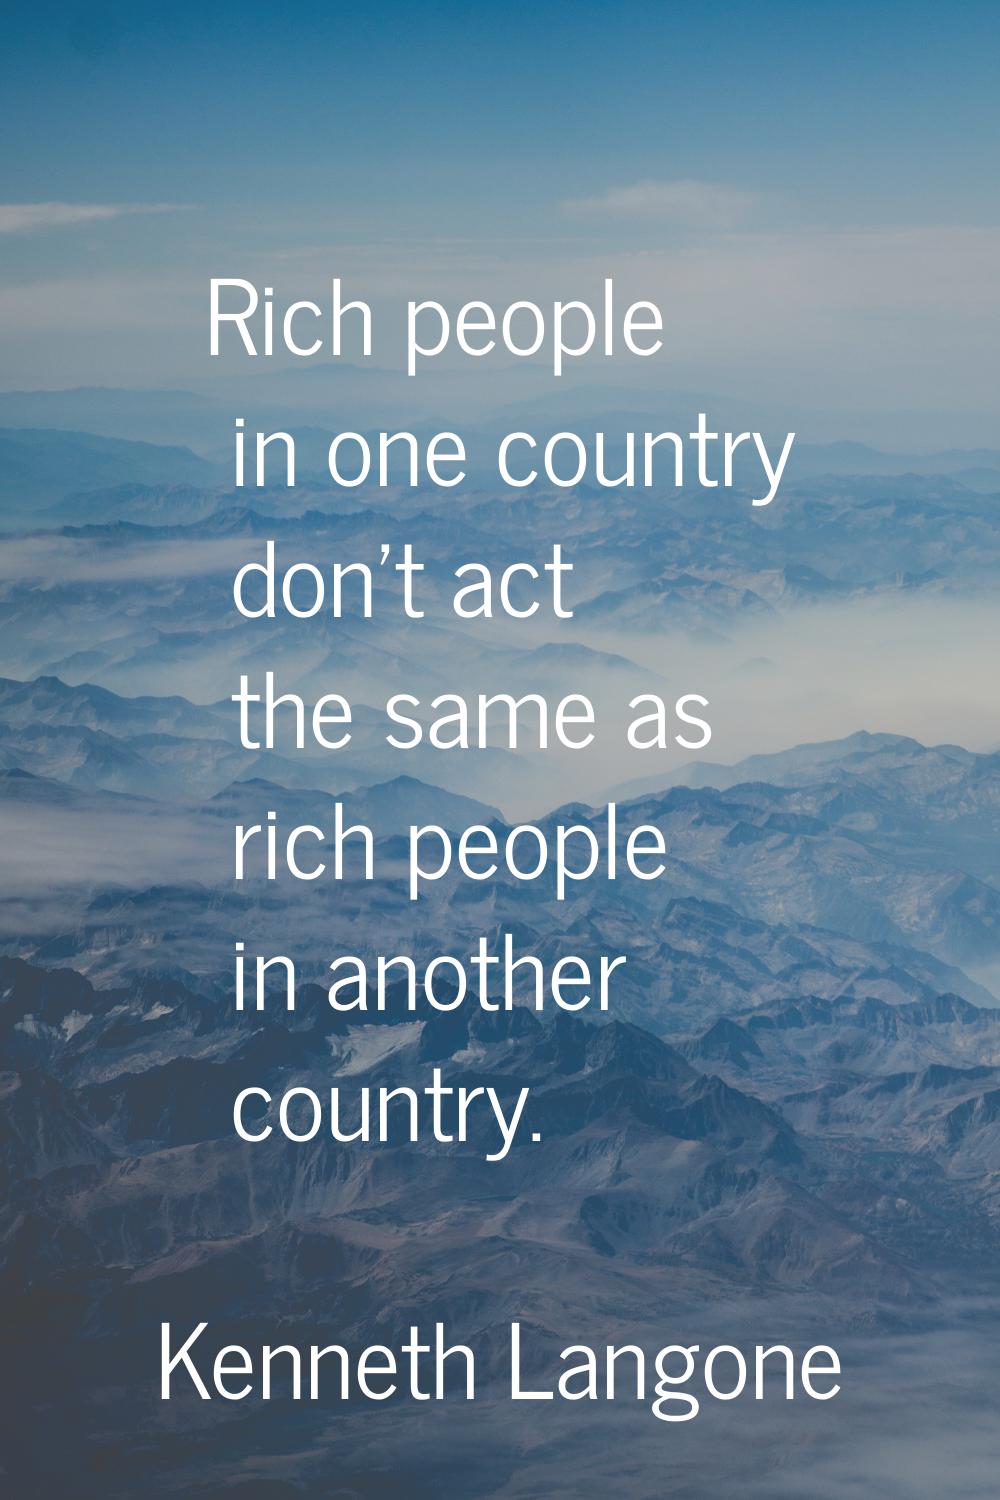 Rich people in one country don't act the same as rich people in another country.